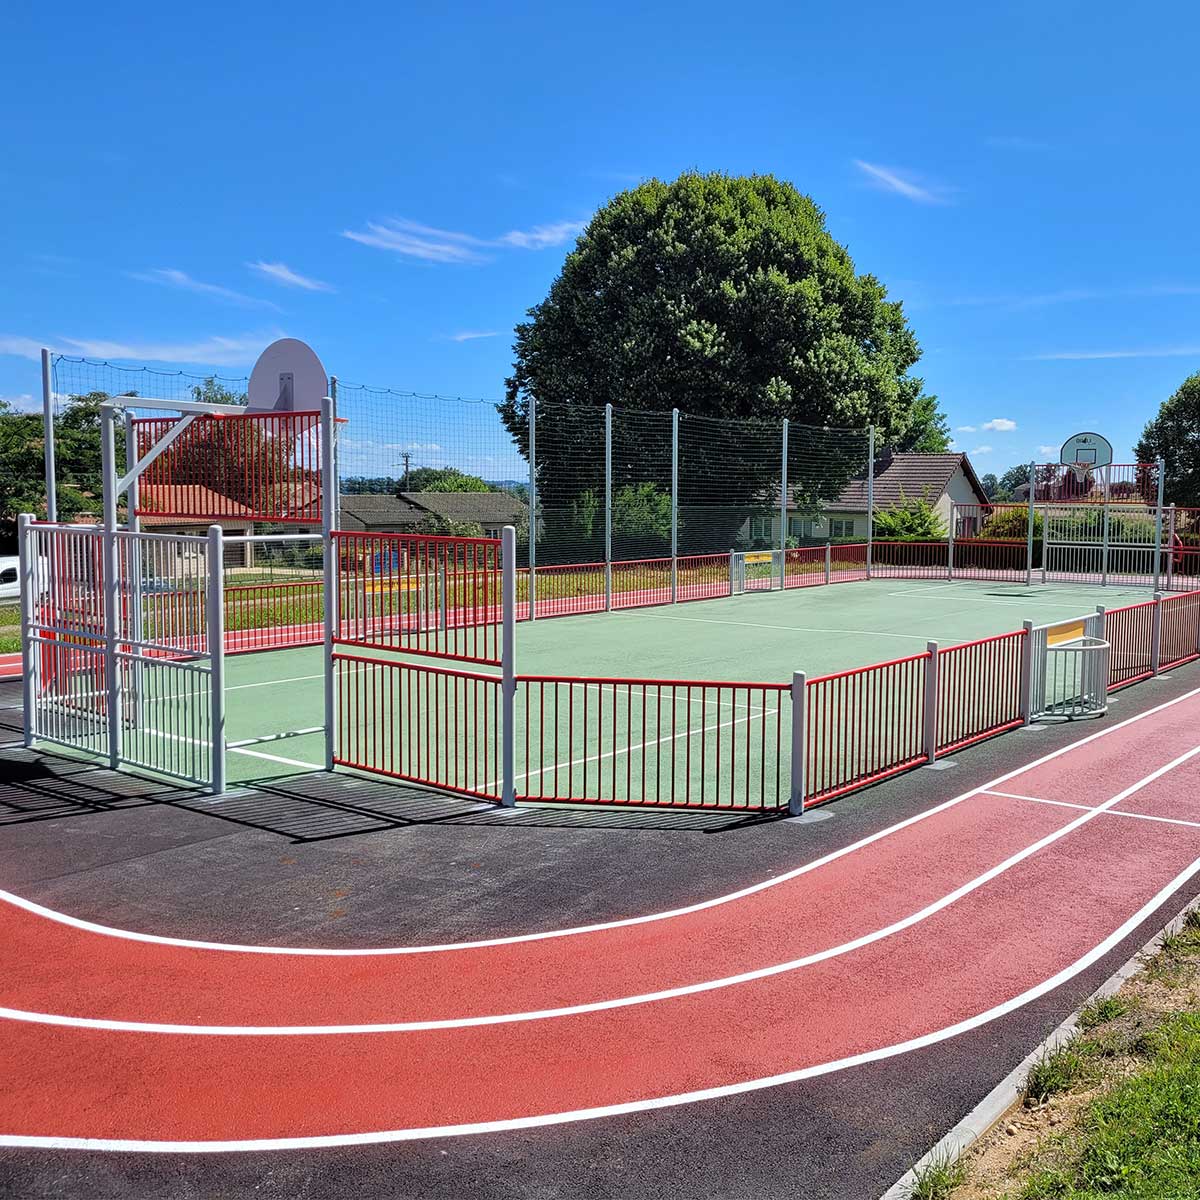 Painted steel multi-sports pitch with running track